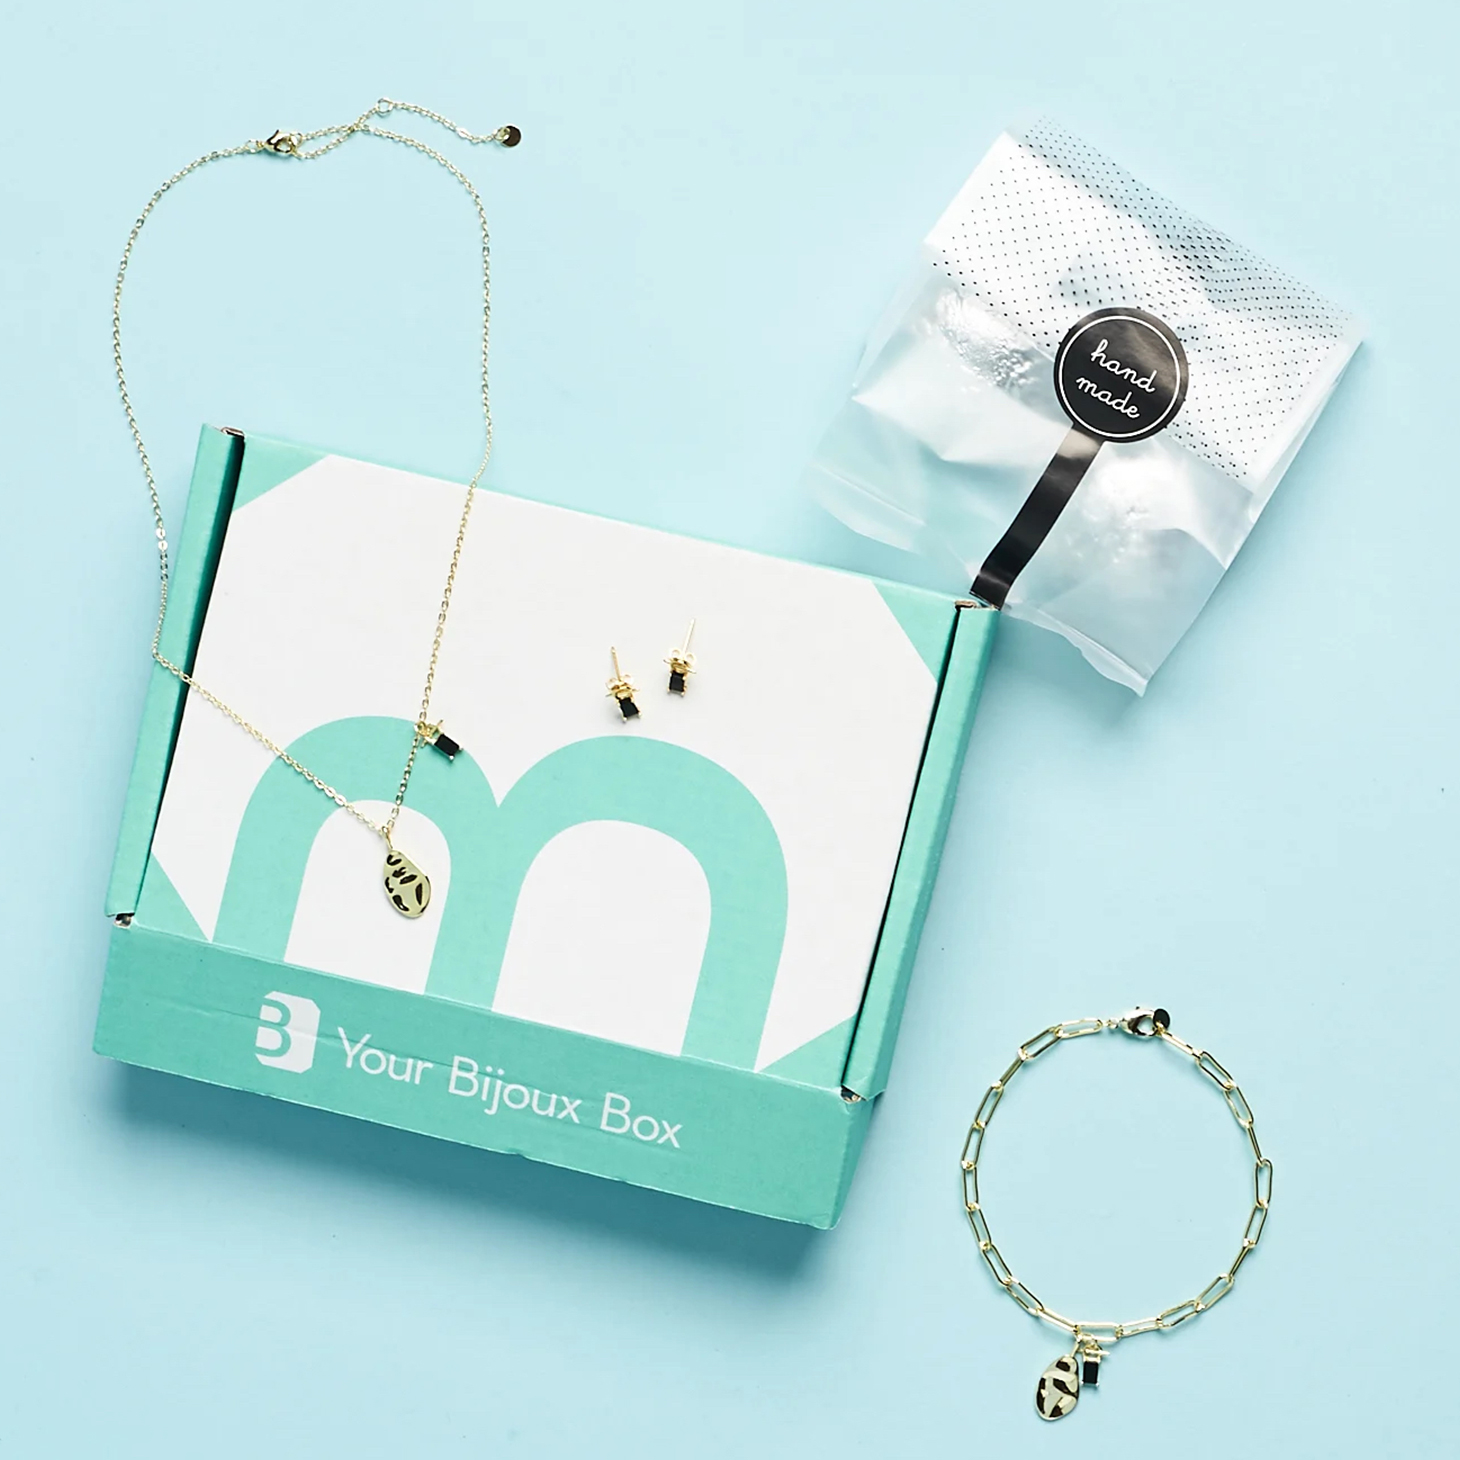 Your Bijoux Box Cyber Monday Deal: Gift Subscription Promotion – Buy 2 Get 1 Free, Buy 4 Get 2 Free